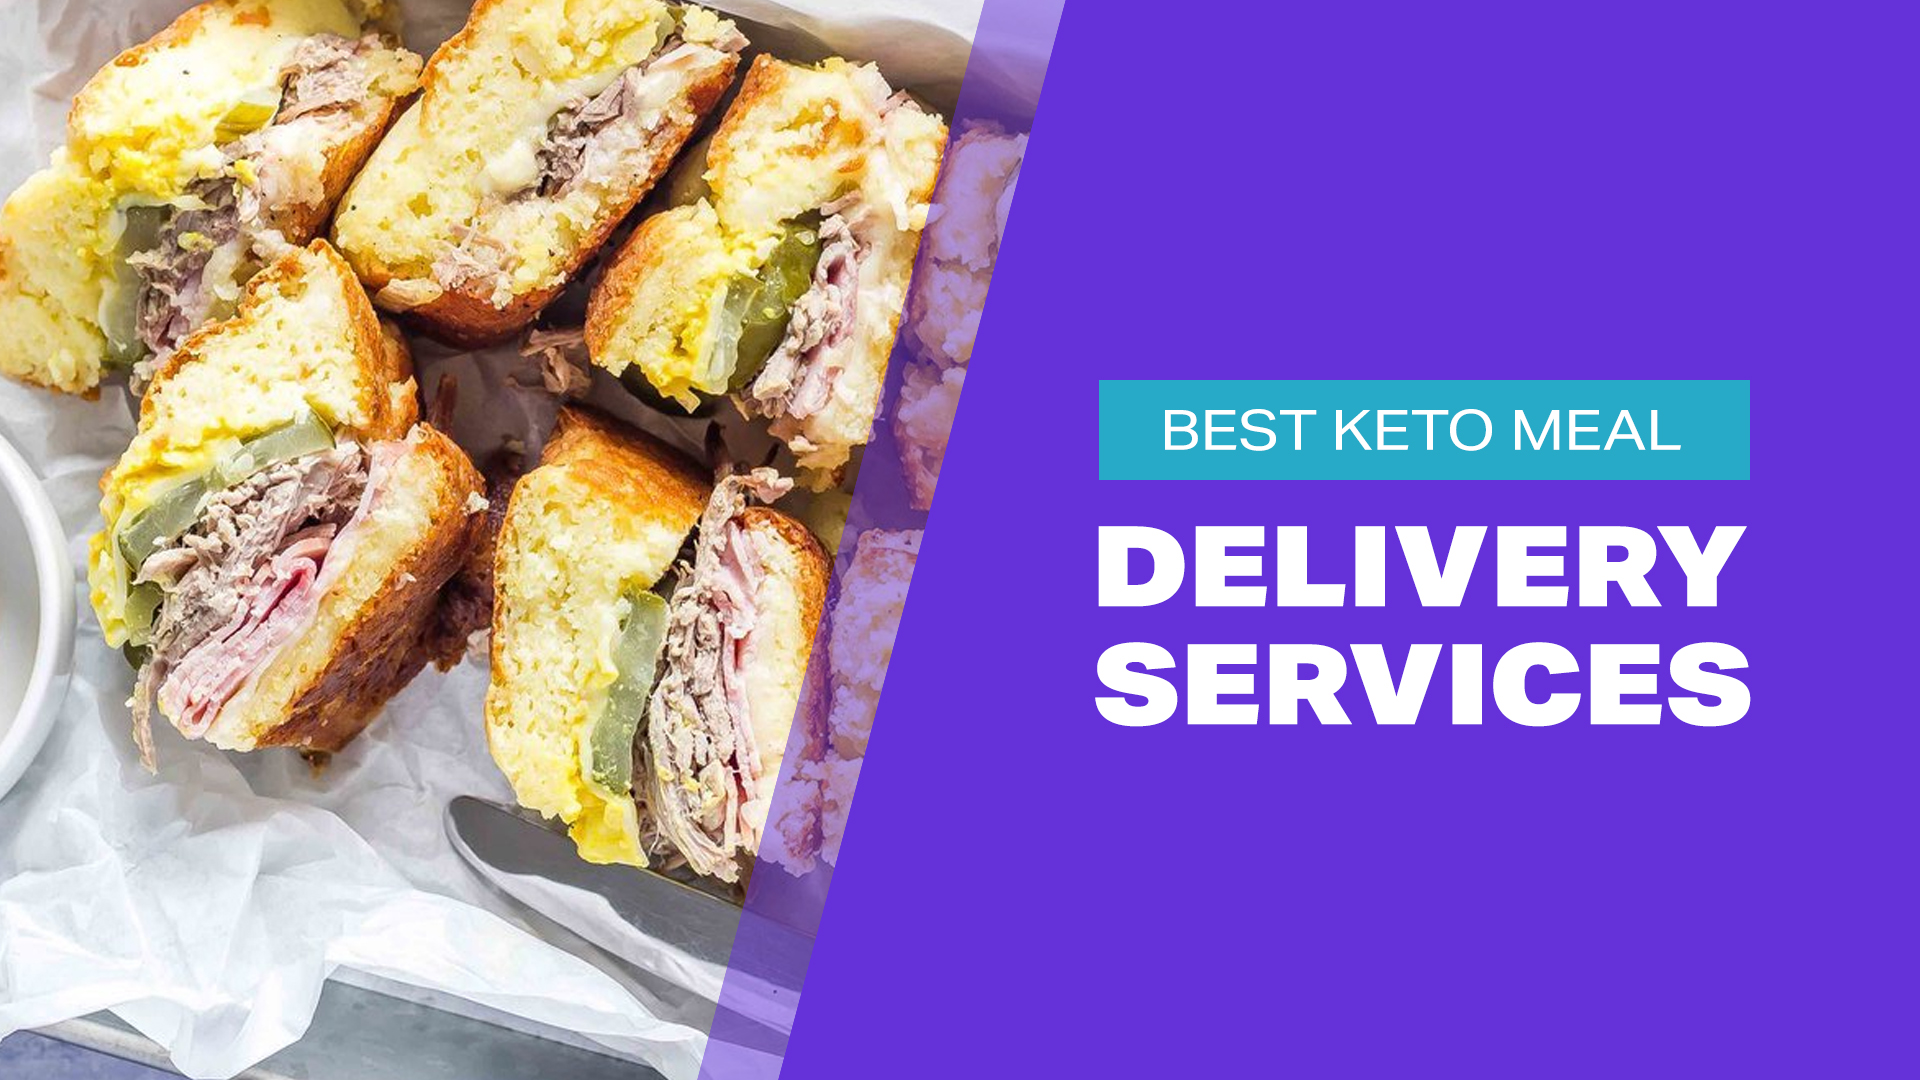 Best Keto Meal Delivery Services